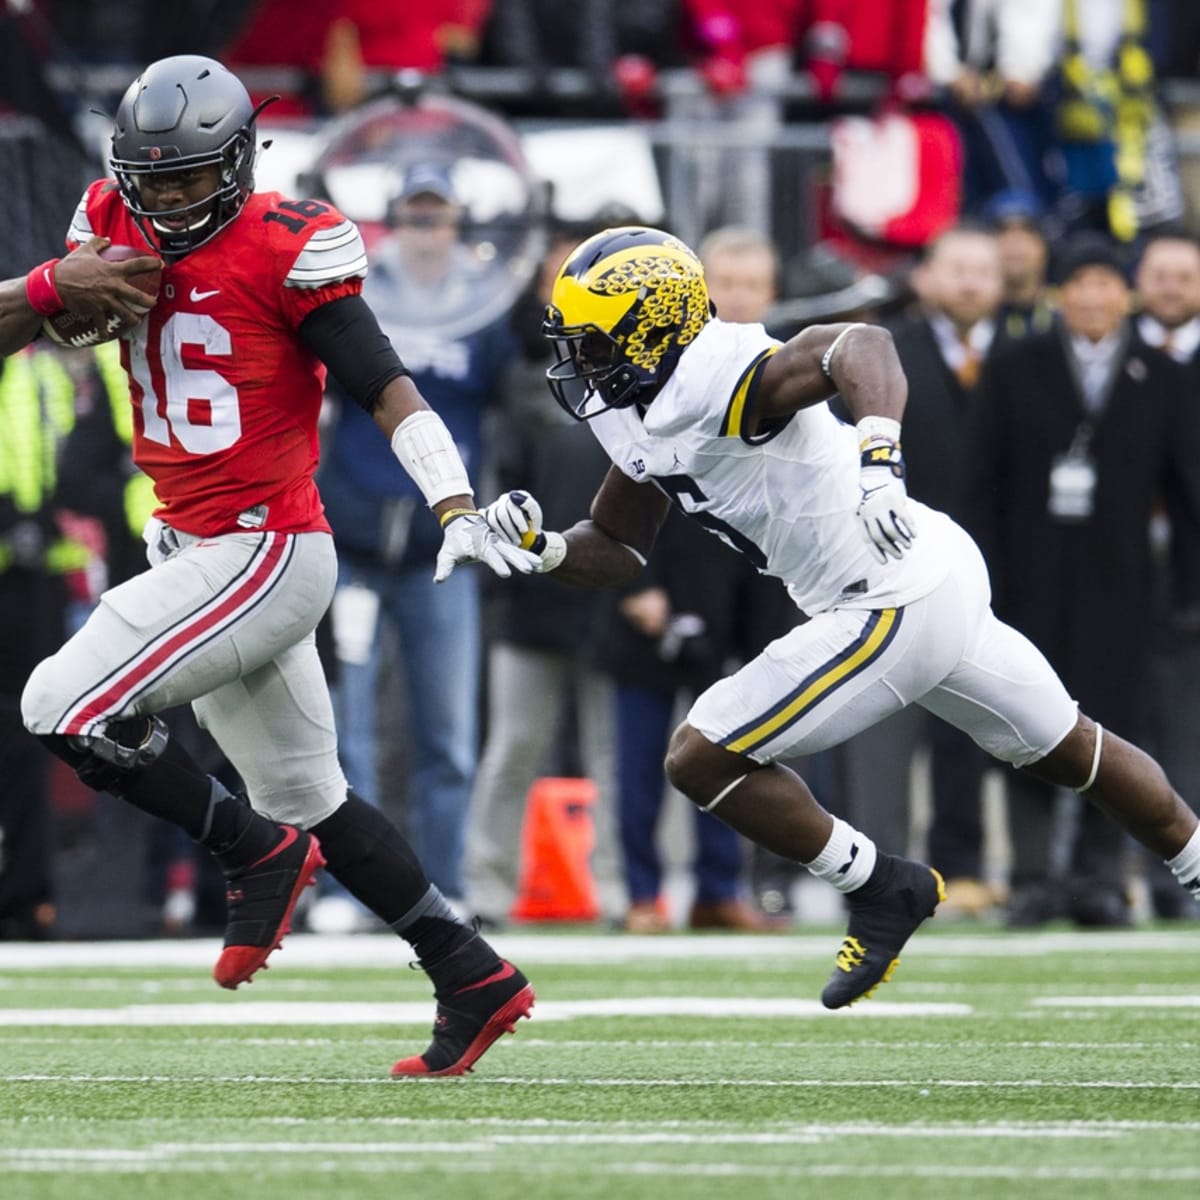 Ohio State bowl game predictions: Where the Buckeyes could play